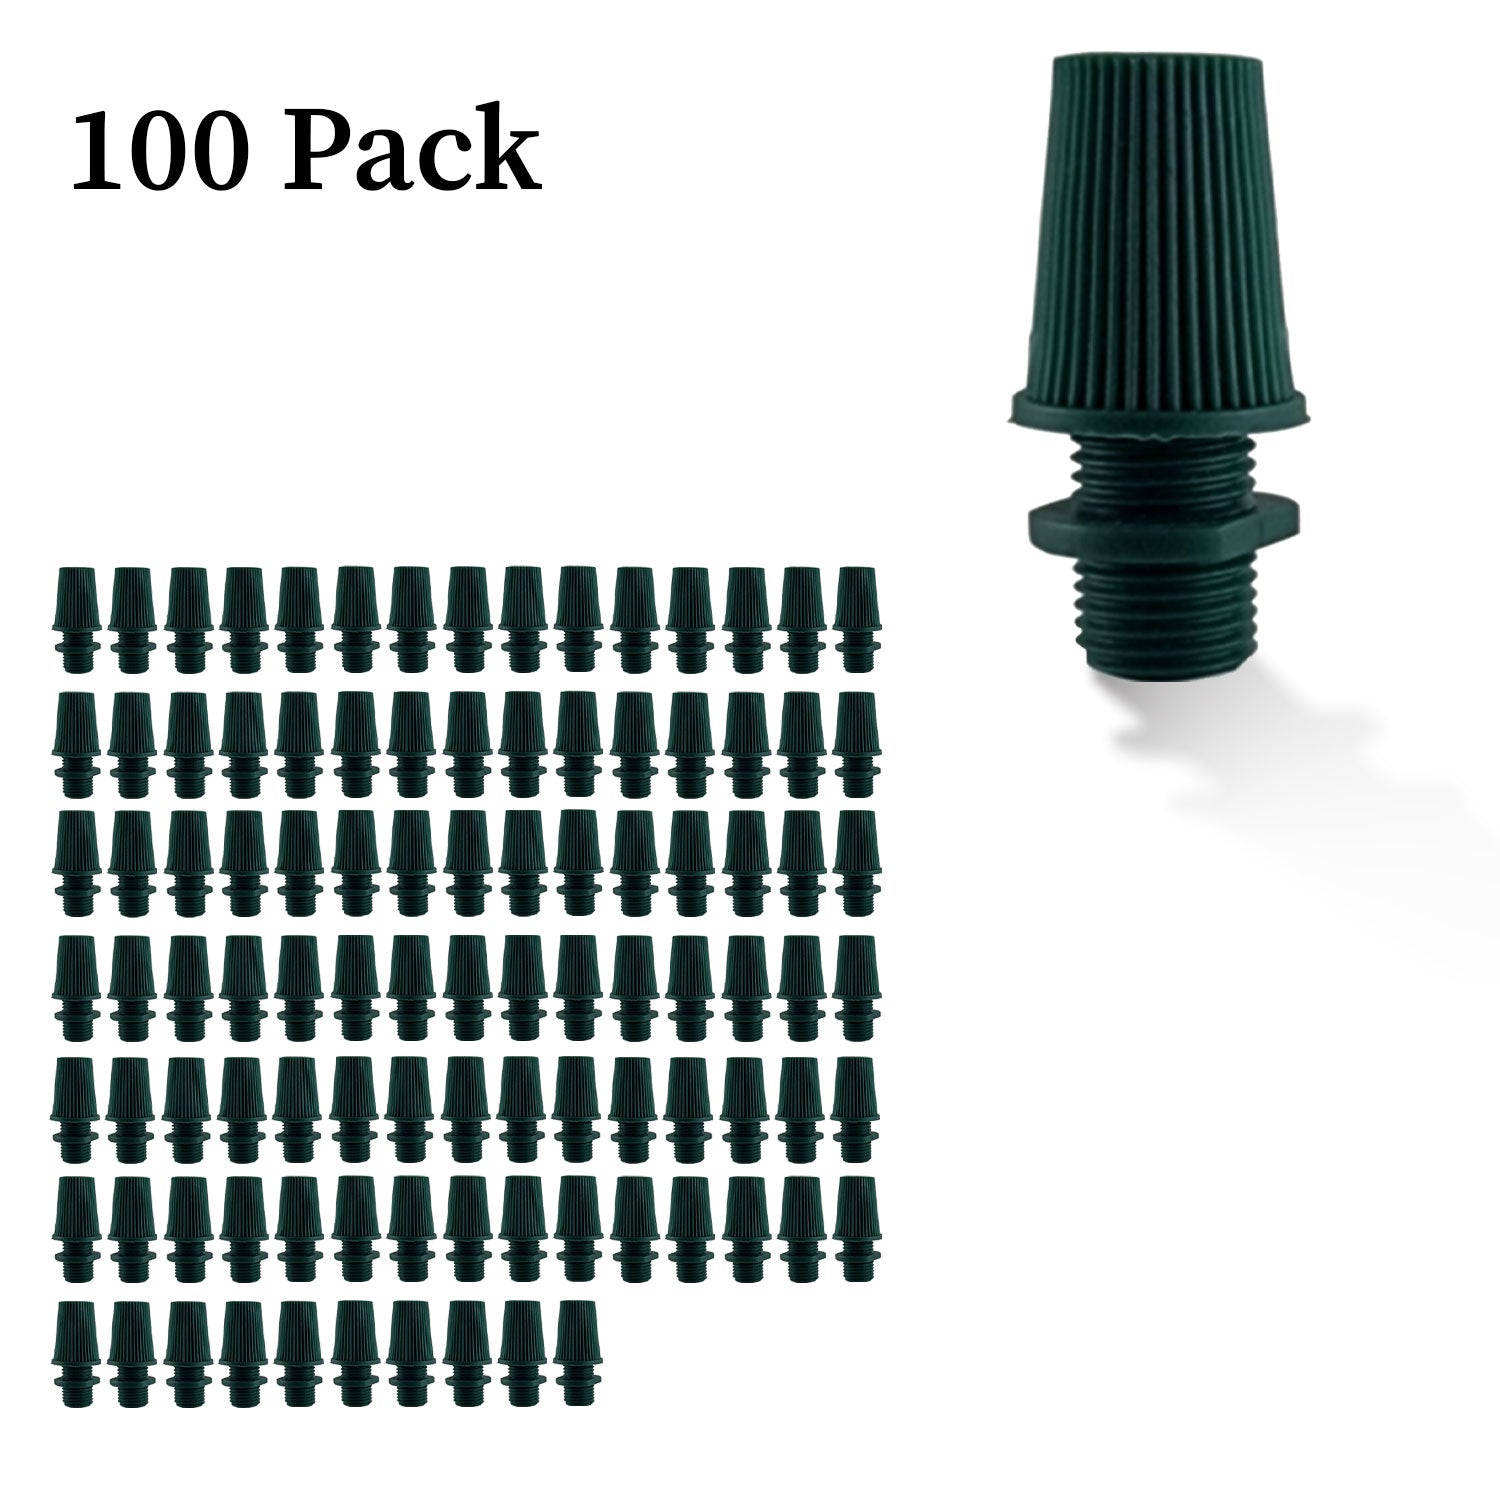 100 pack 100mm green cable cord grip lock